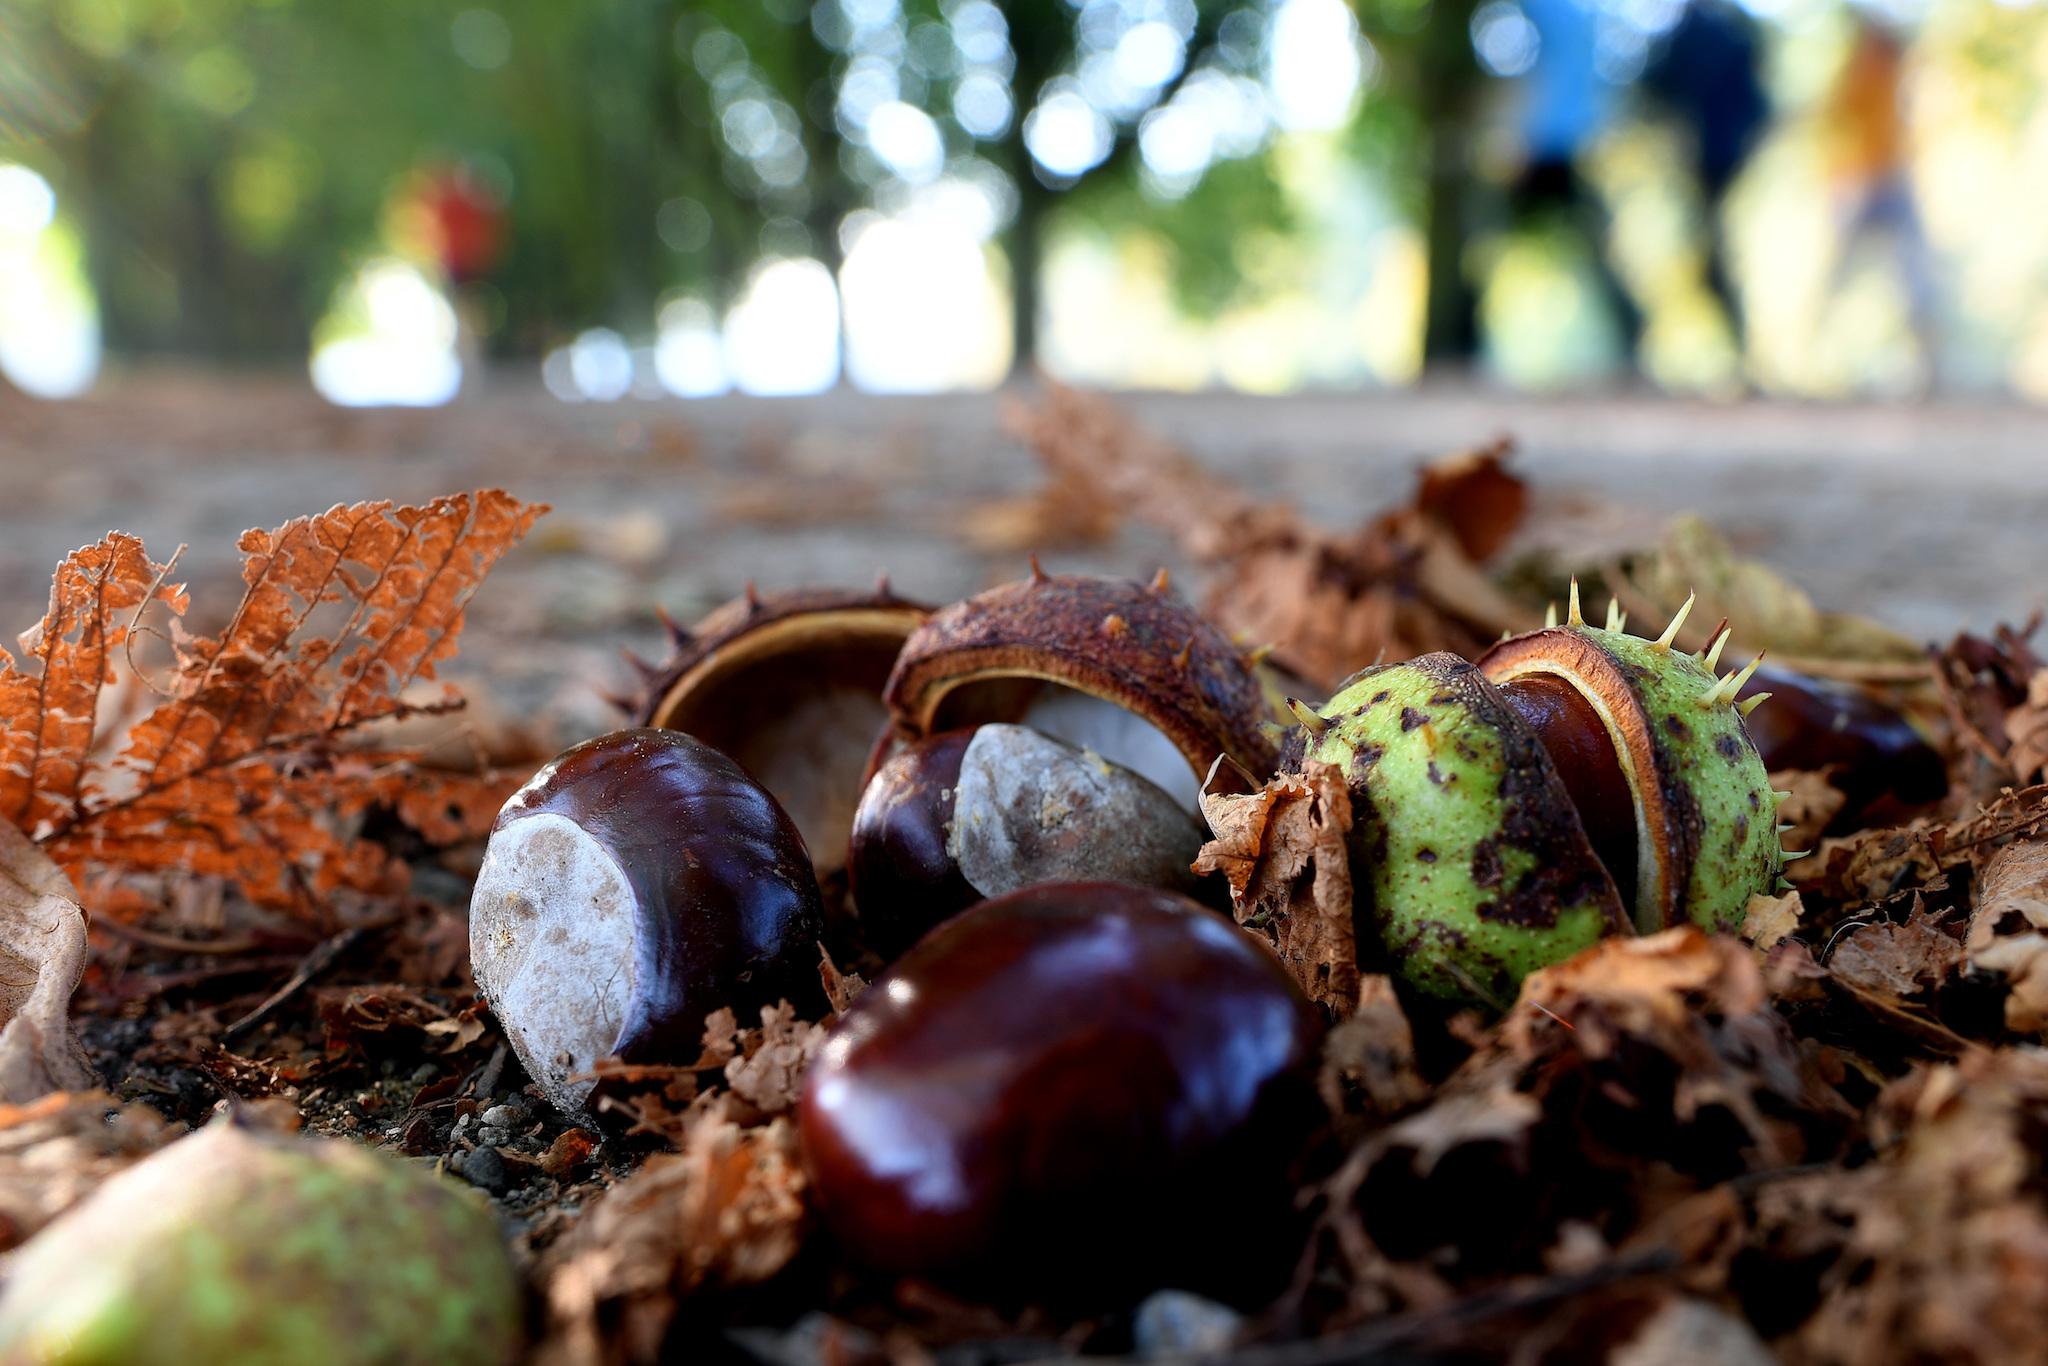 Chestnuts lay at the wayside in Cologne, western Germany, on September 22, 2016. Autumn officially begins on the equinox on September 22